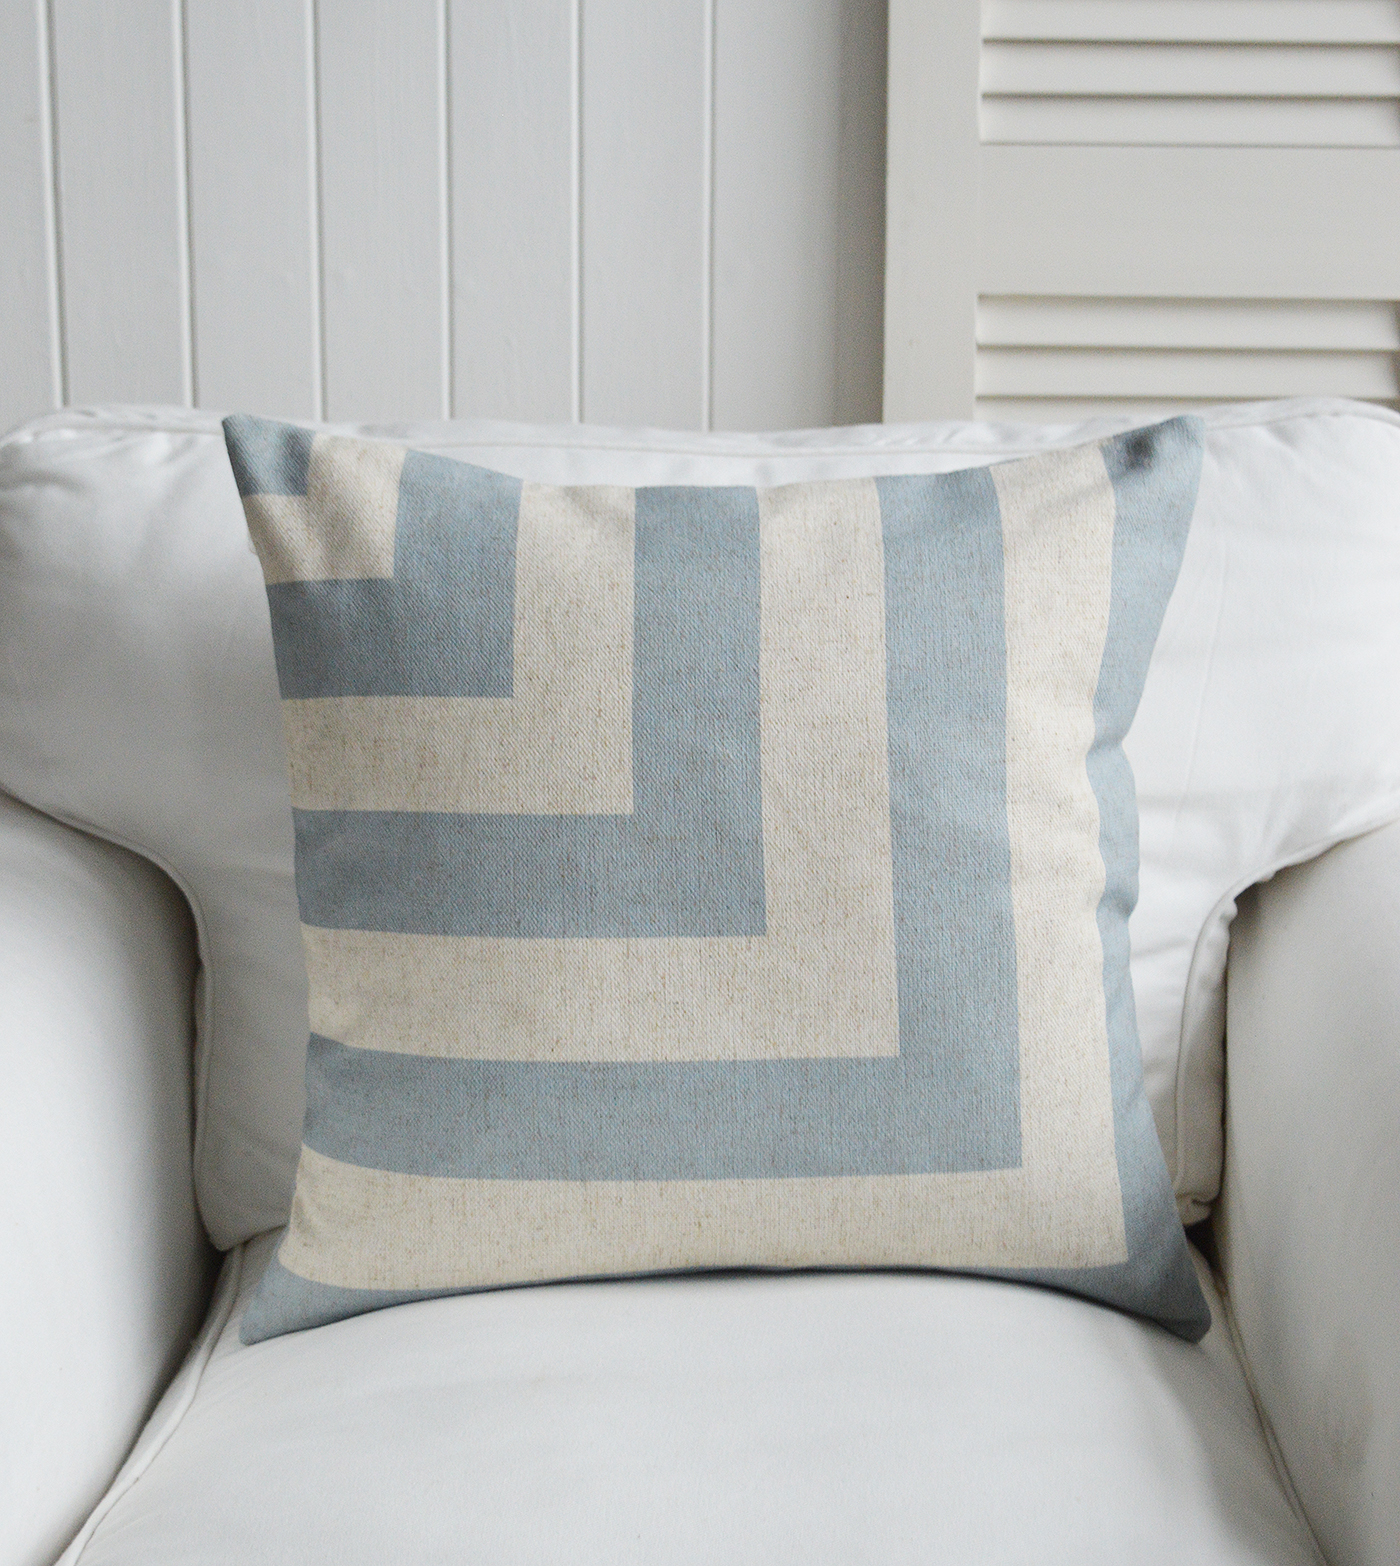 Maple grove vintage style cushions for New England modern country farmhouse and coastal furniture and interiors